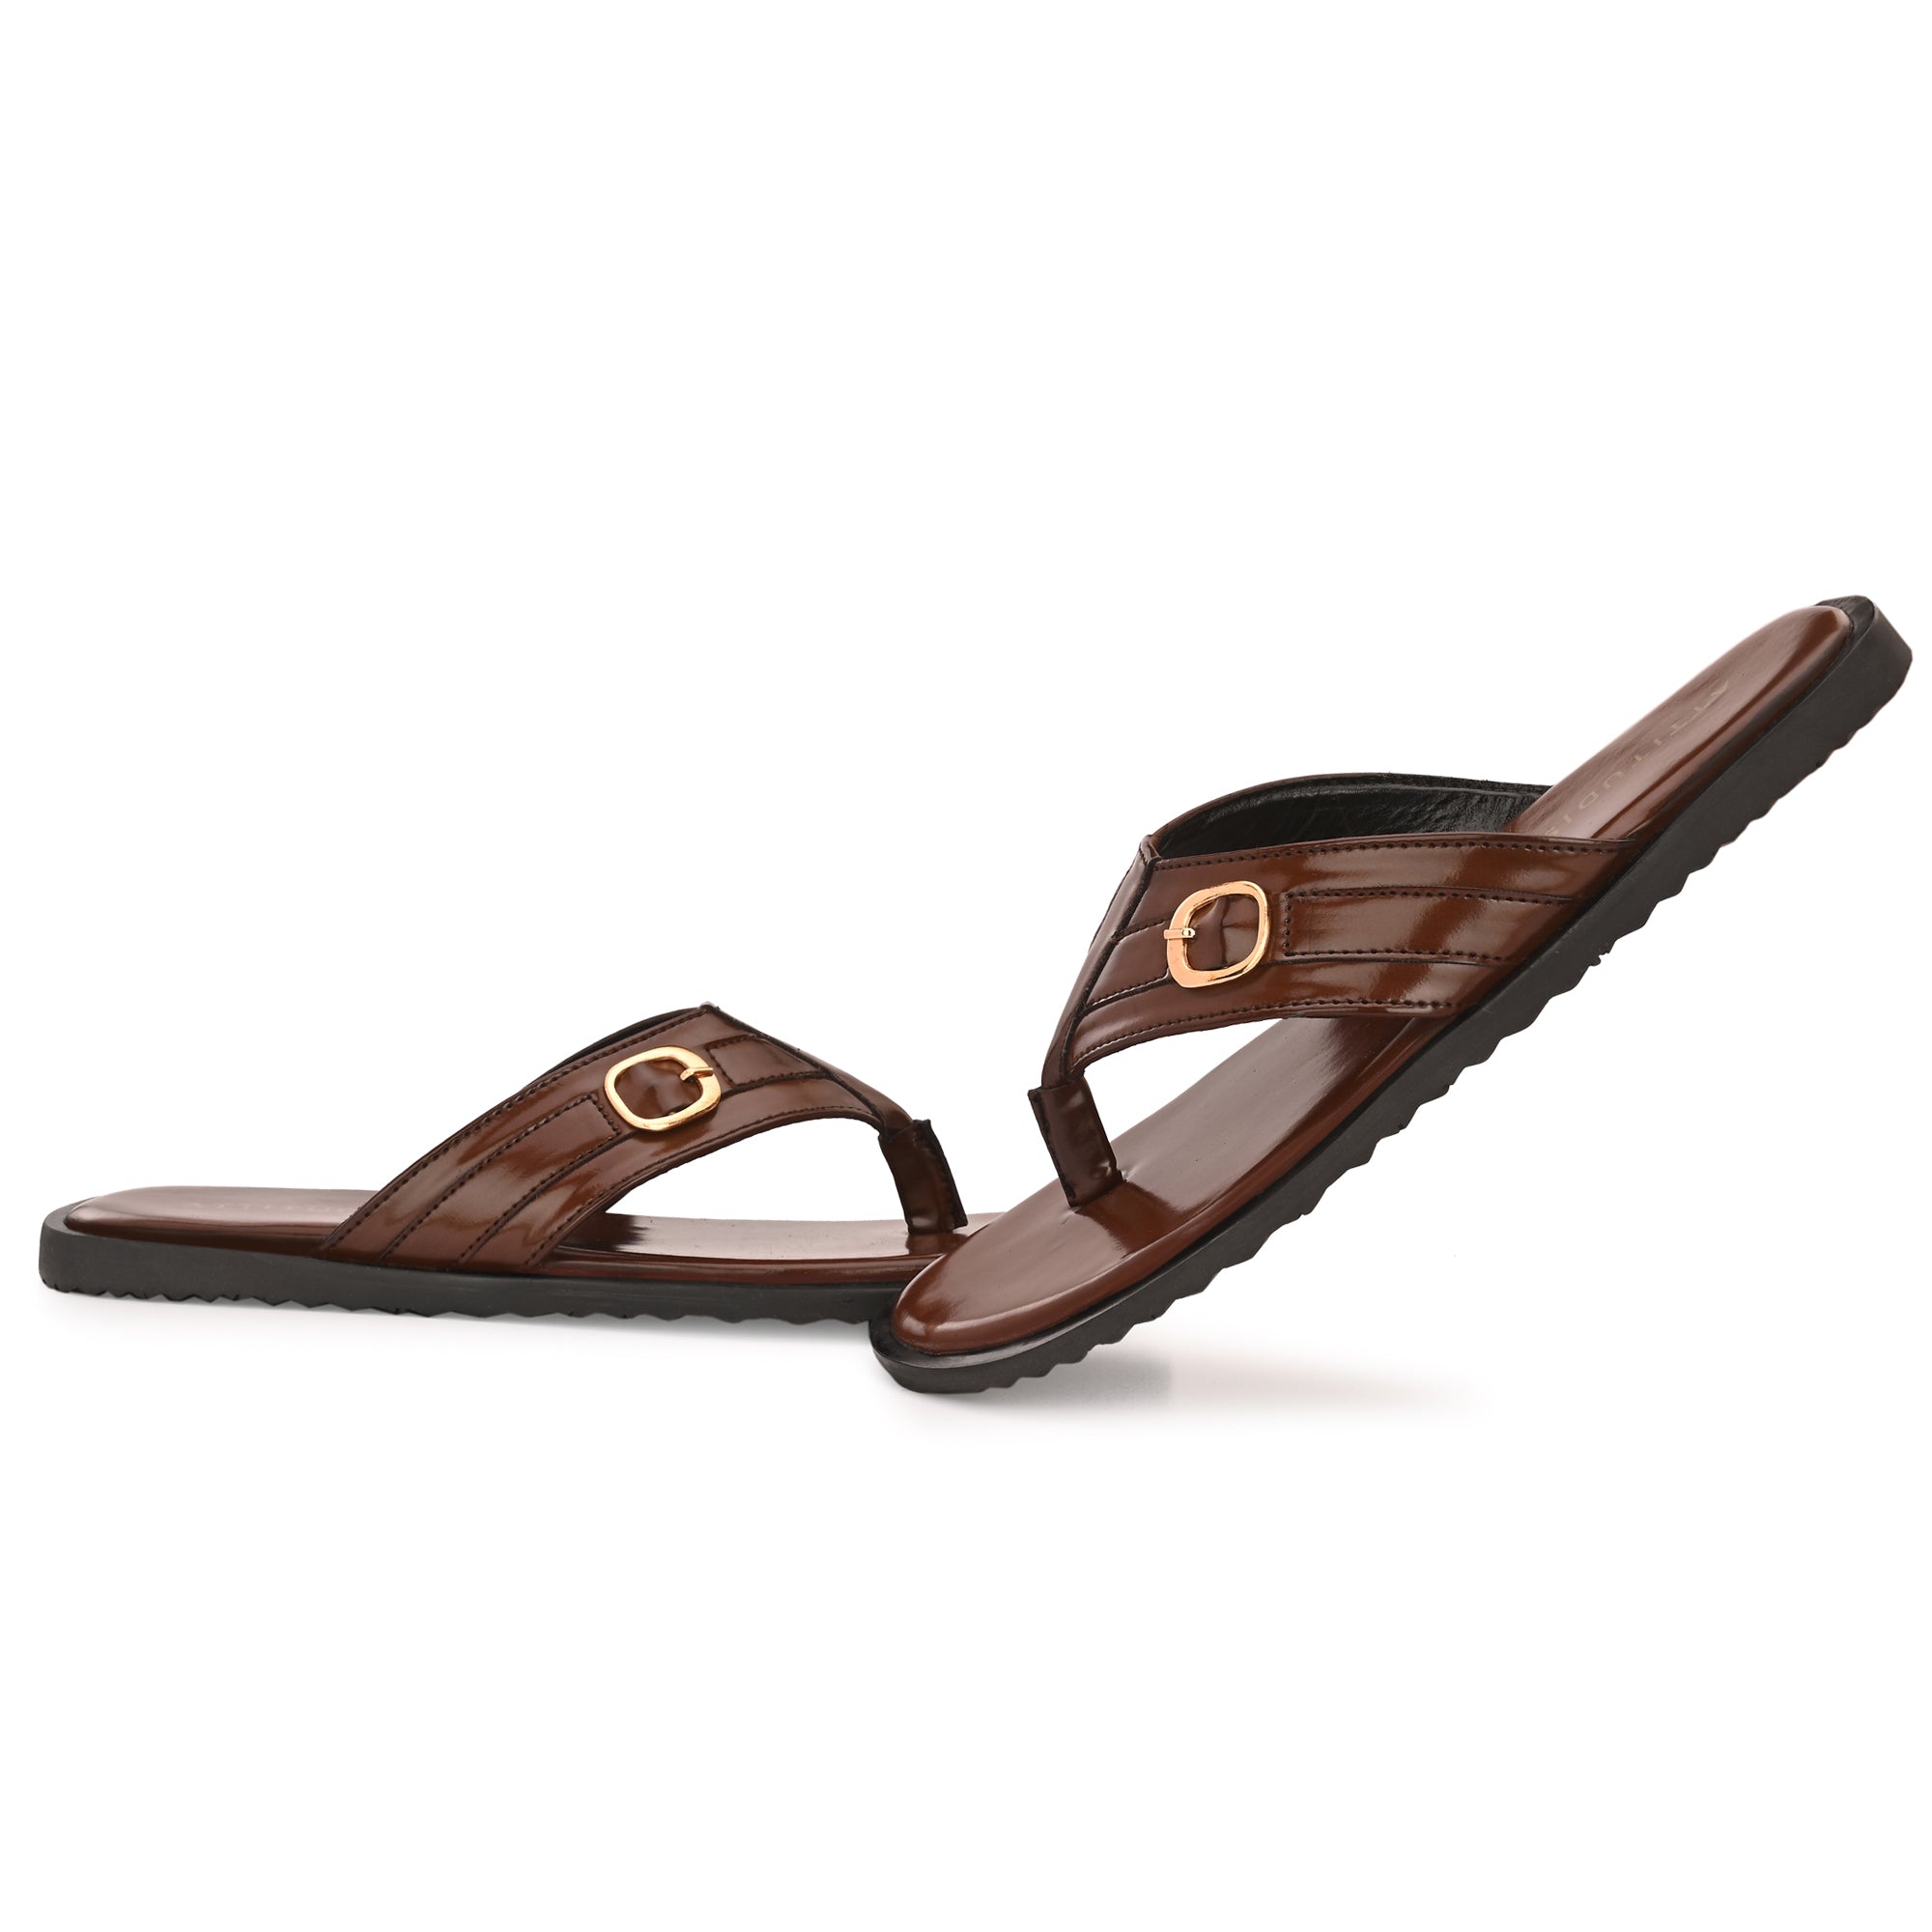 attitudist-brown-double-stitched-strap-thong-slippers-for-men-with-golden-buckle